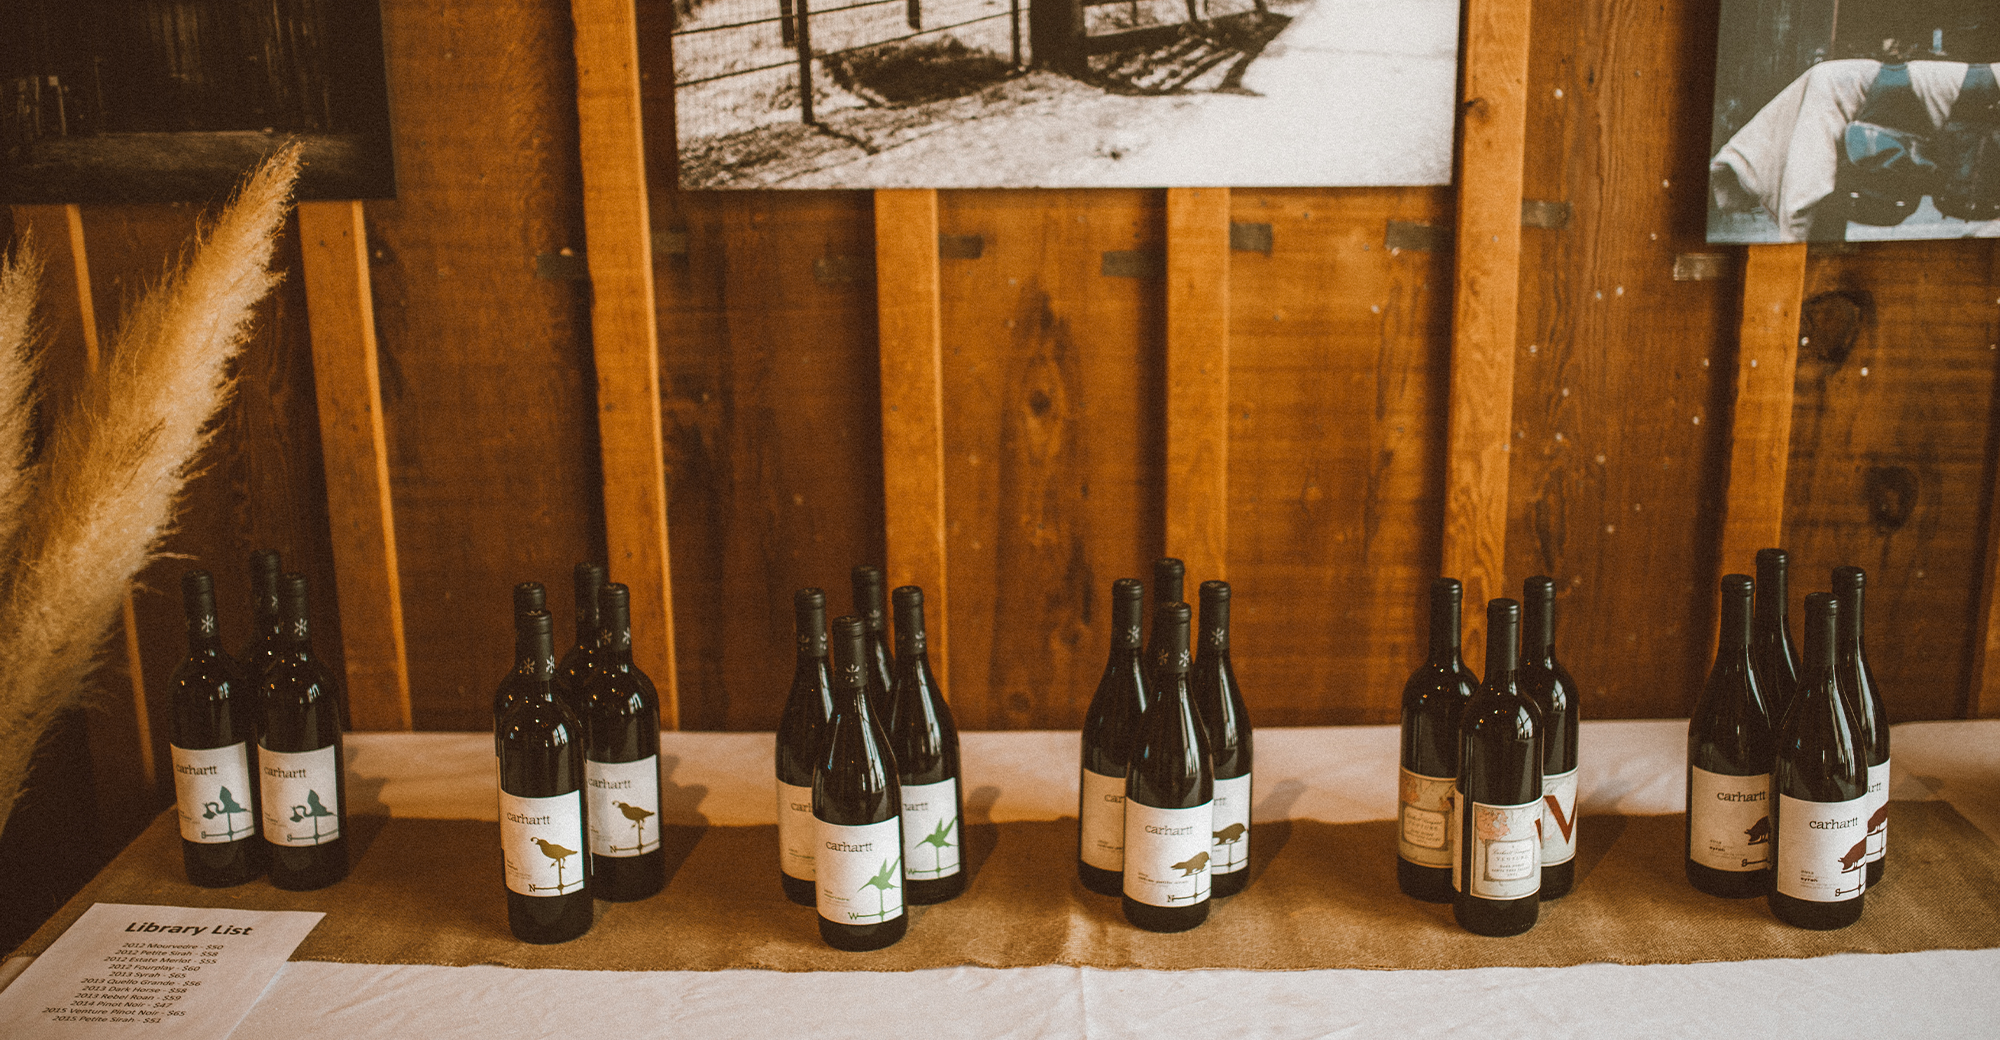 Library Wines - Carhartt Family Wines